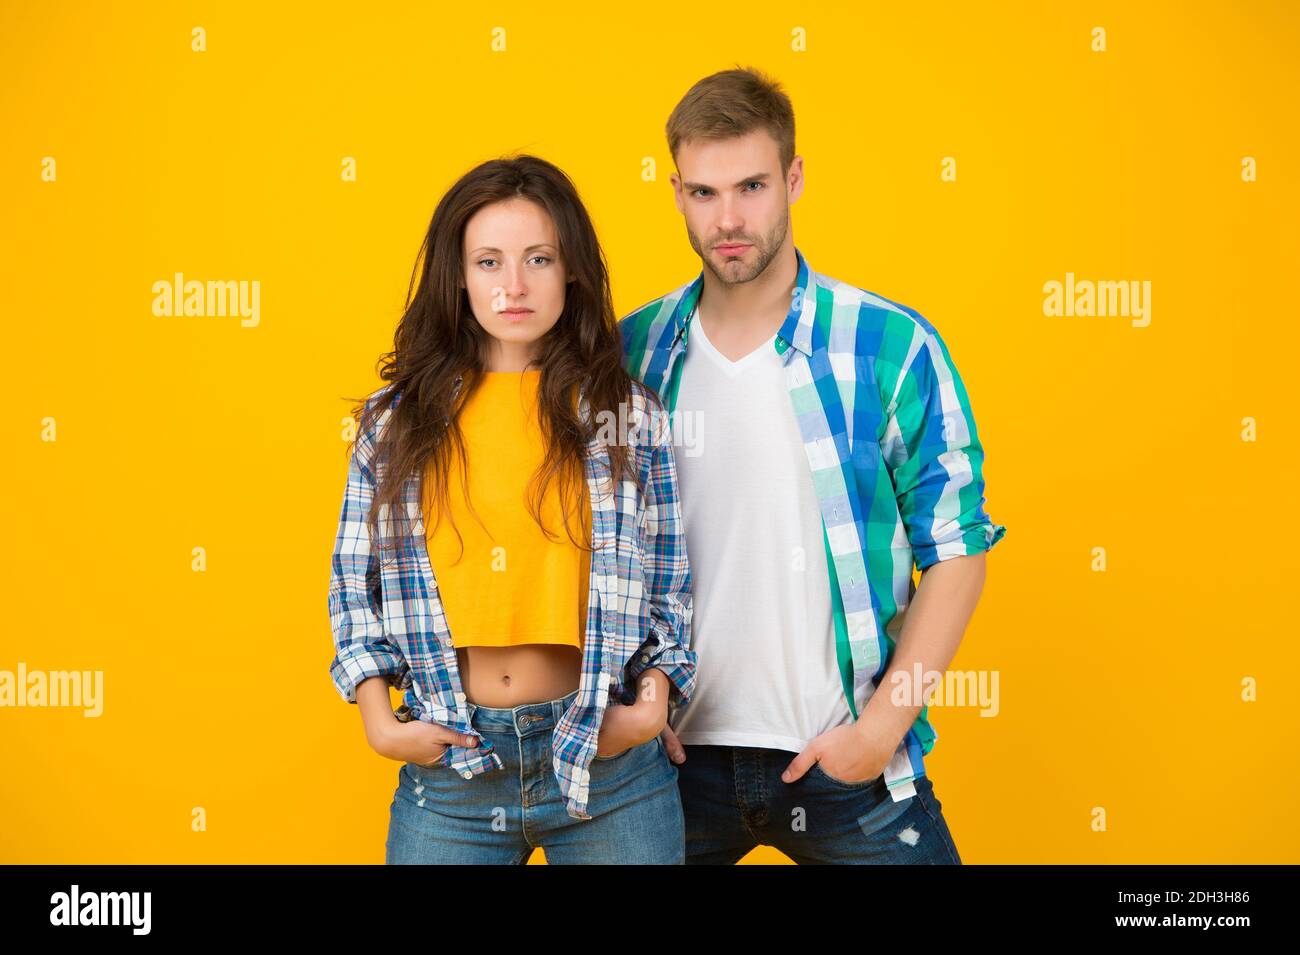 https://c8.alamy.com/comp/2DH3H86/their-style-is-a-lot-more-casual-couple-in-casual-wear-vogue-models-yellow-background-fashion-clothes-contemporary-streetwear-trendy-lifestyle-dont-miss-our-latest-trends-in-clothing-2DH3H86.jpg